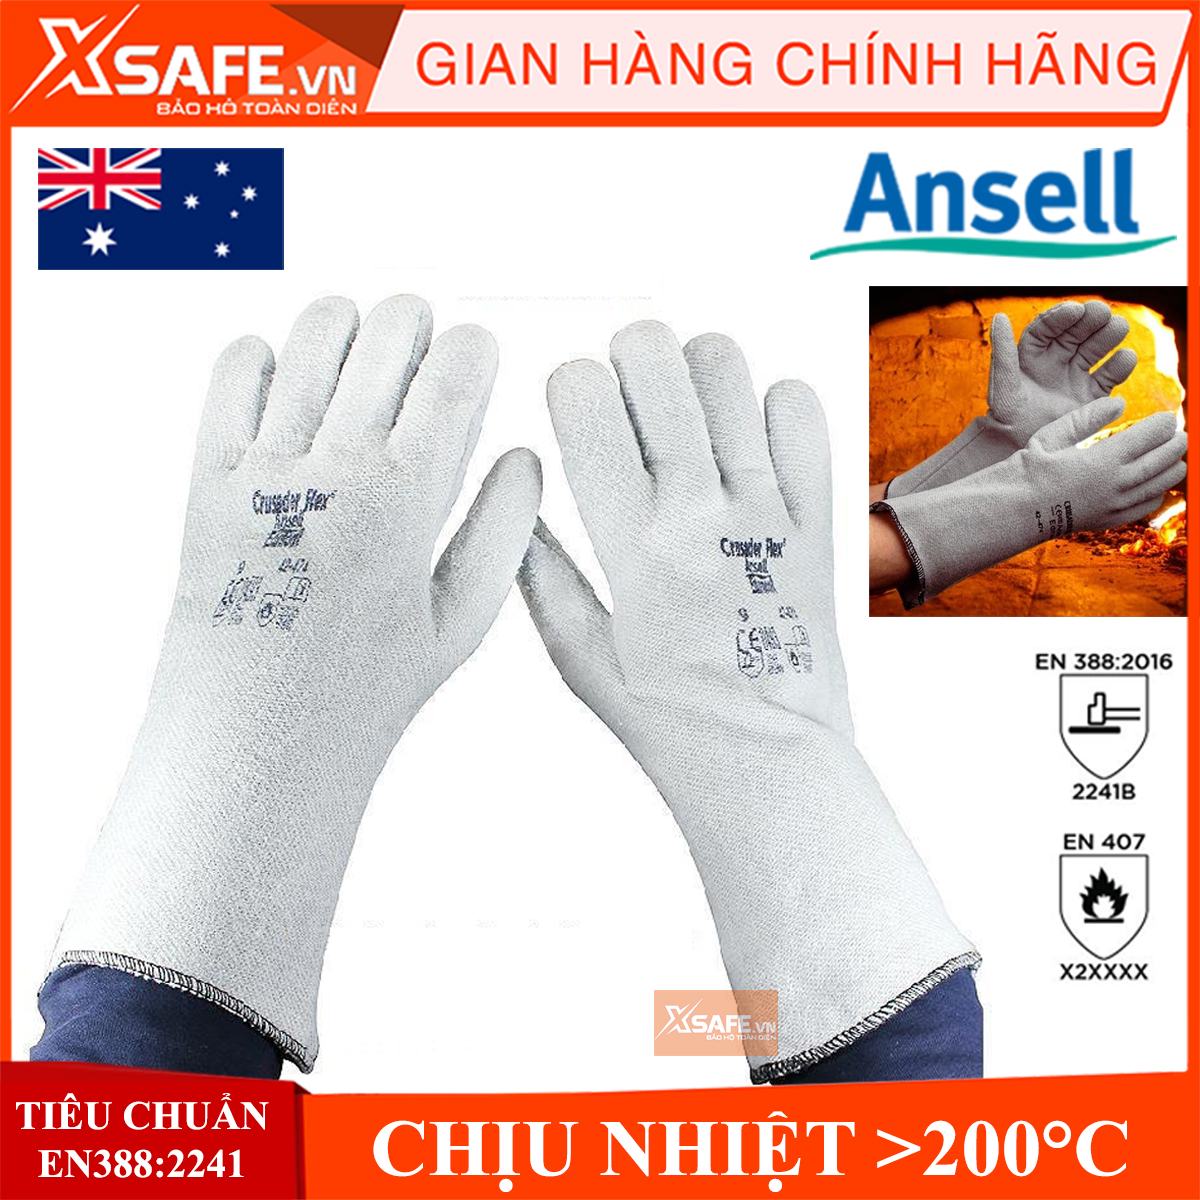 Heat resistant gloves Ansell 42-474